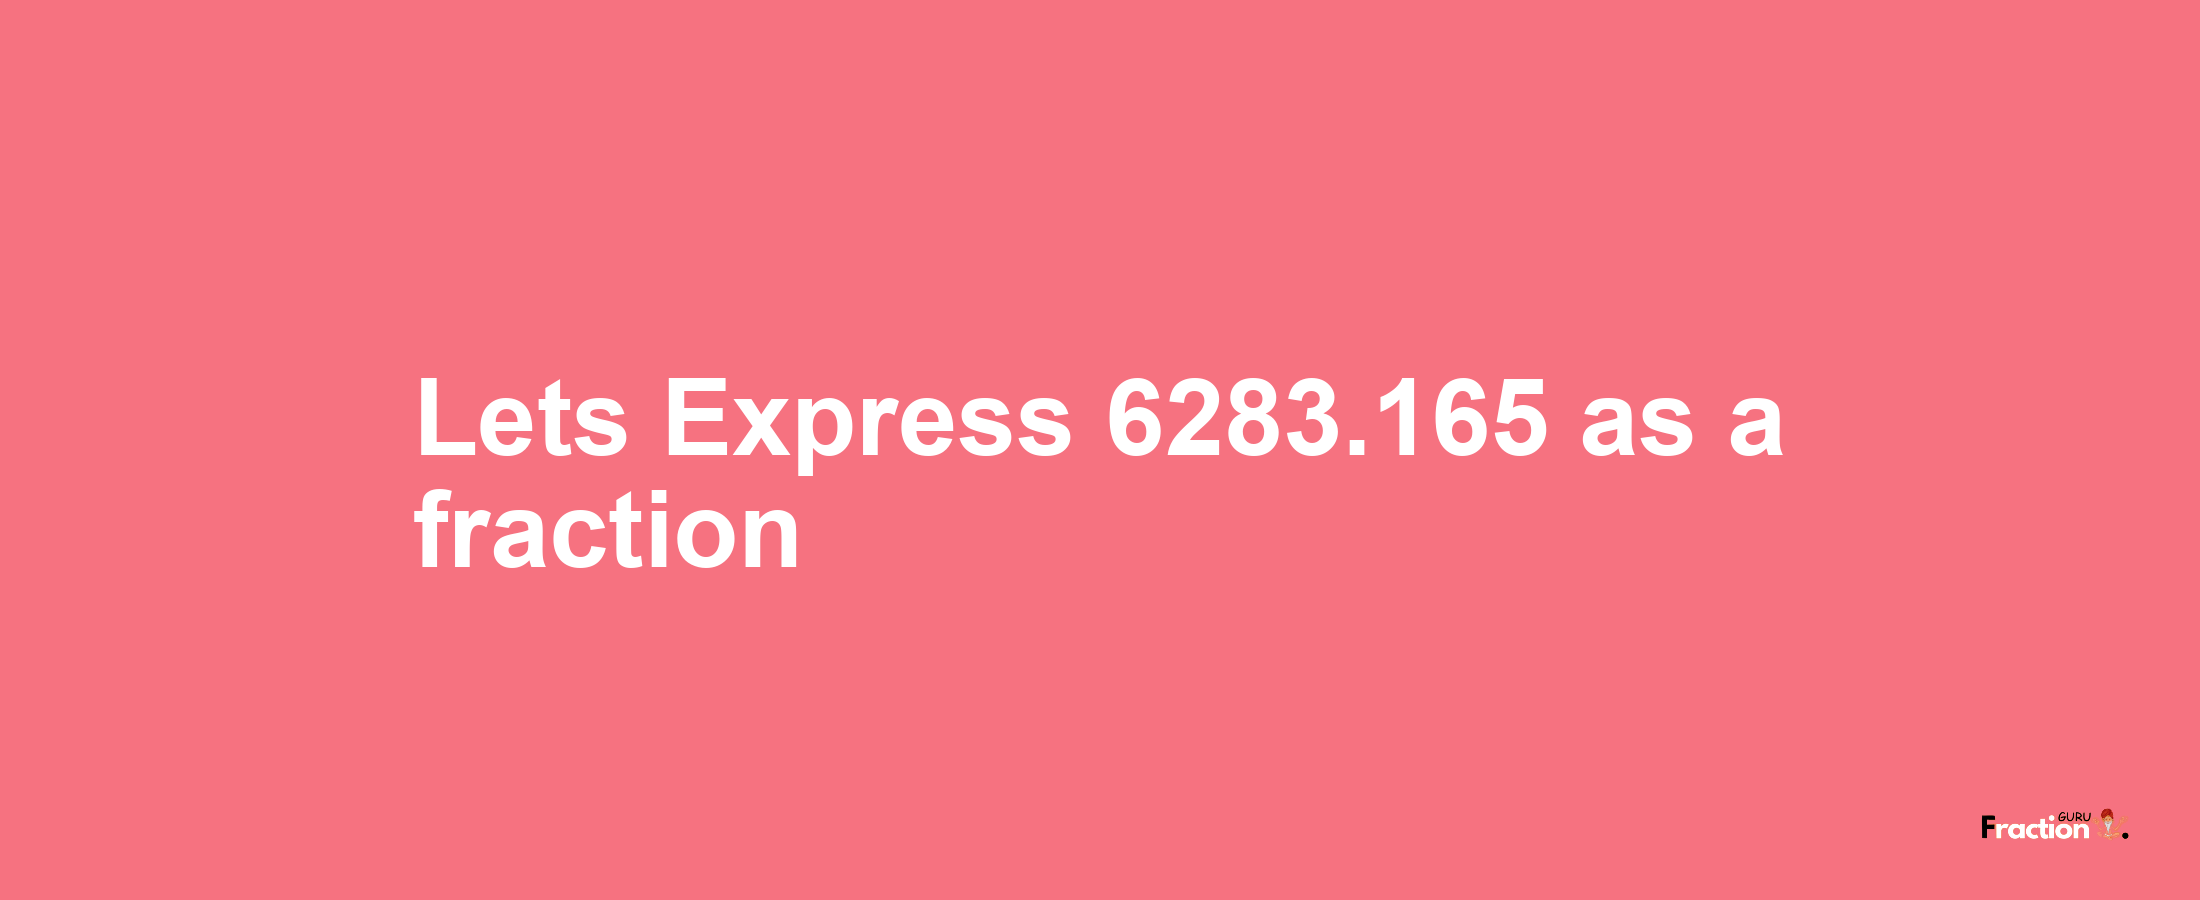 Lets Express 6283.165 as afraction